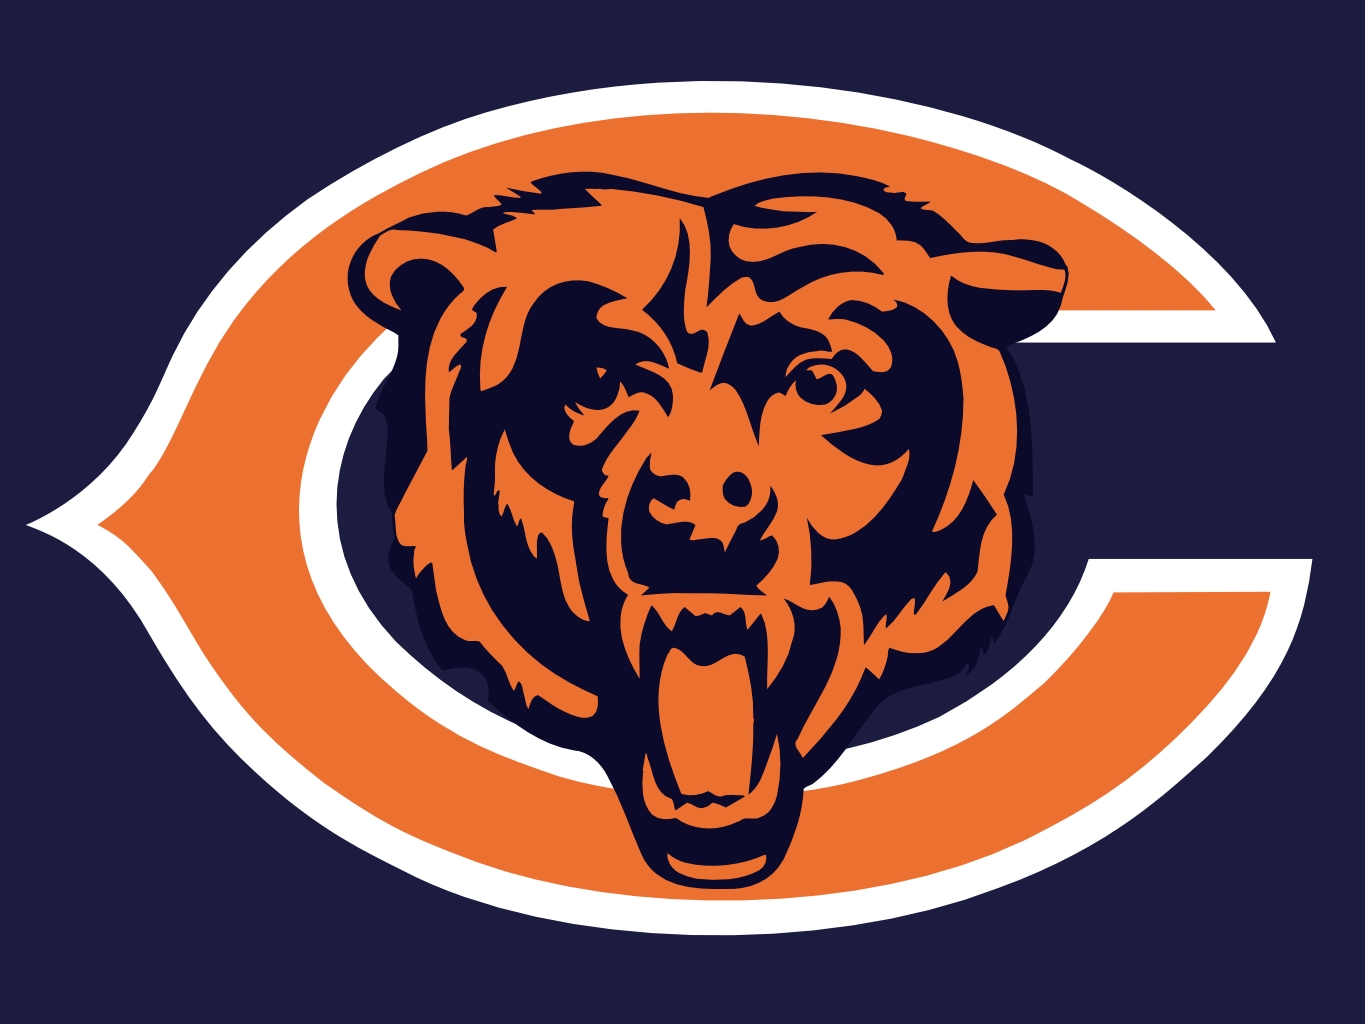 It S My Mind Chicagoist Bears Gaining Respect Pats Game Moved To